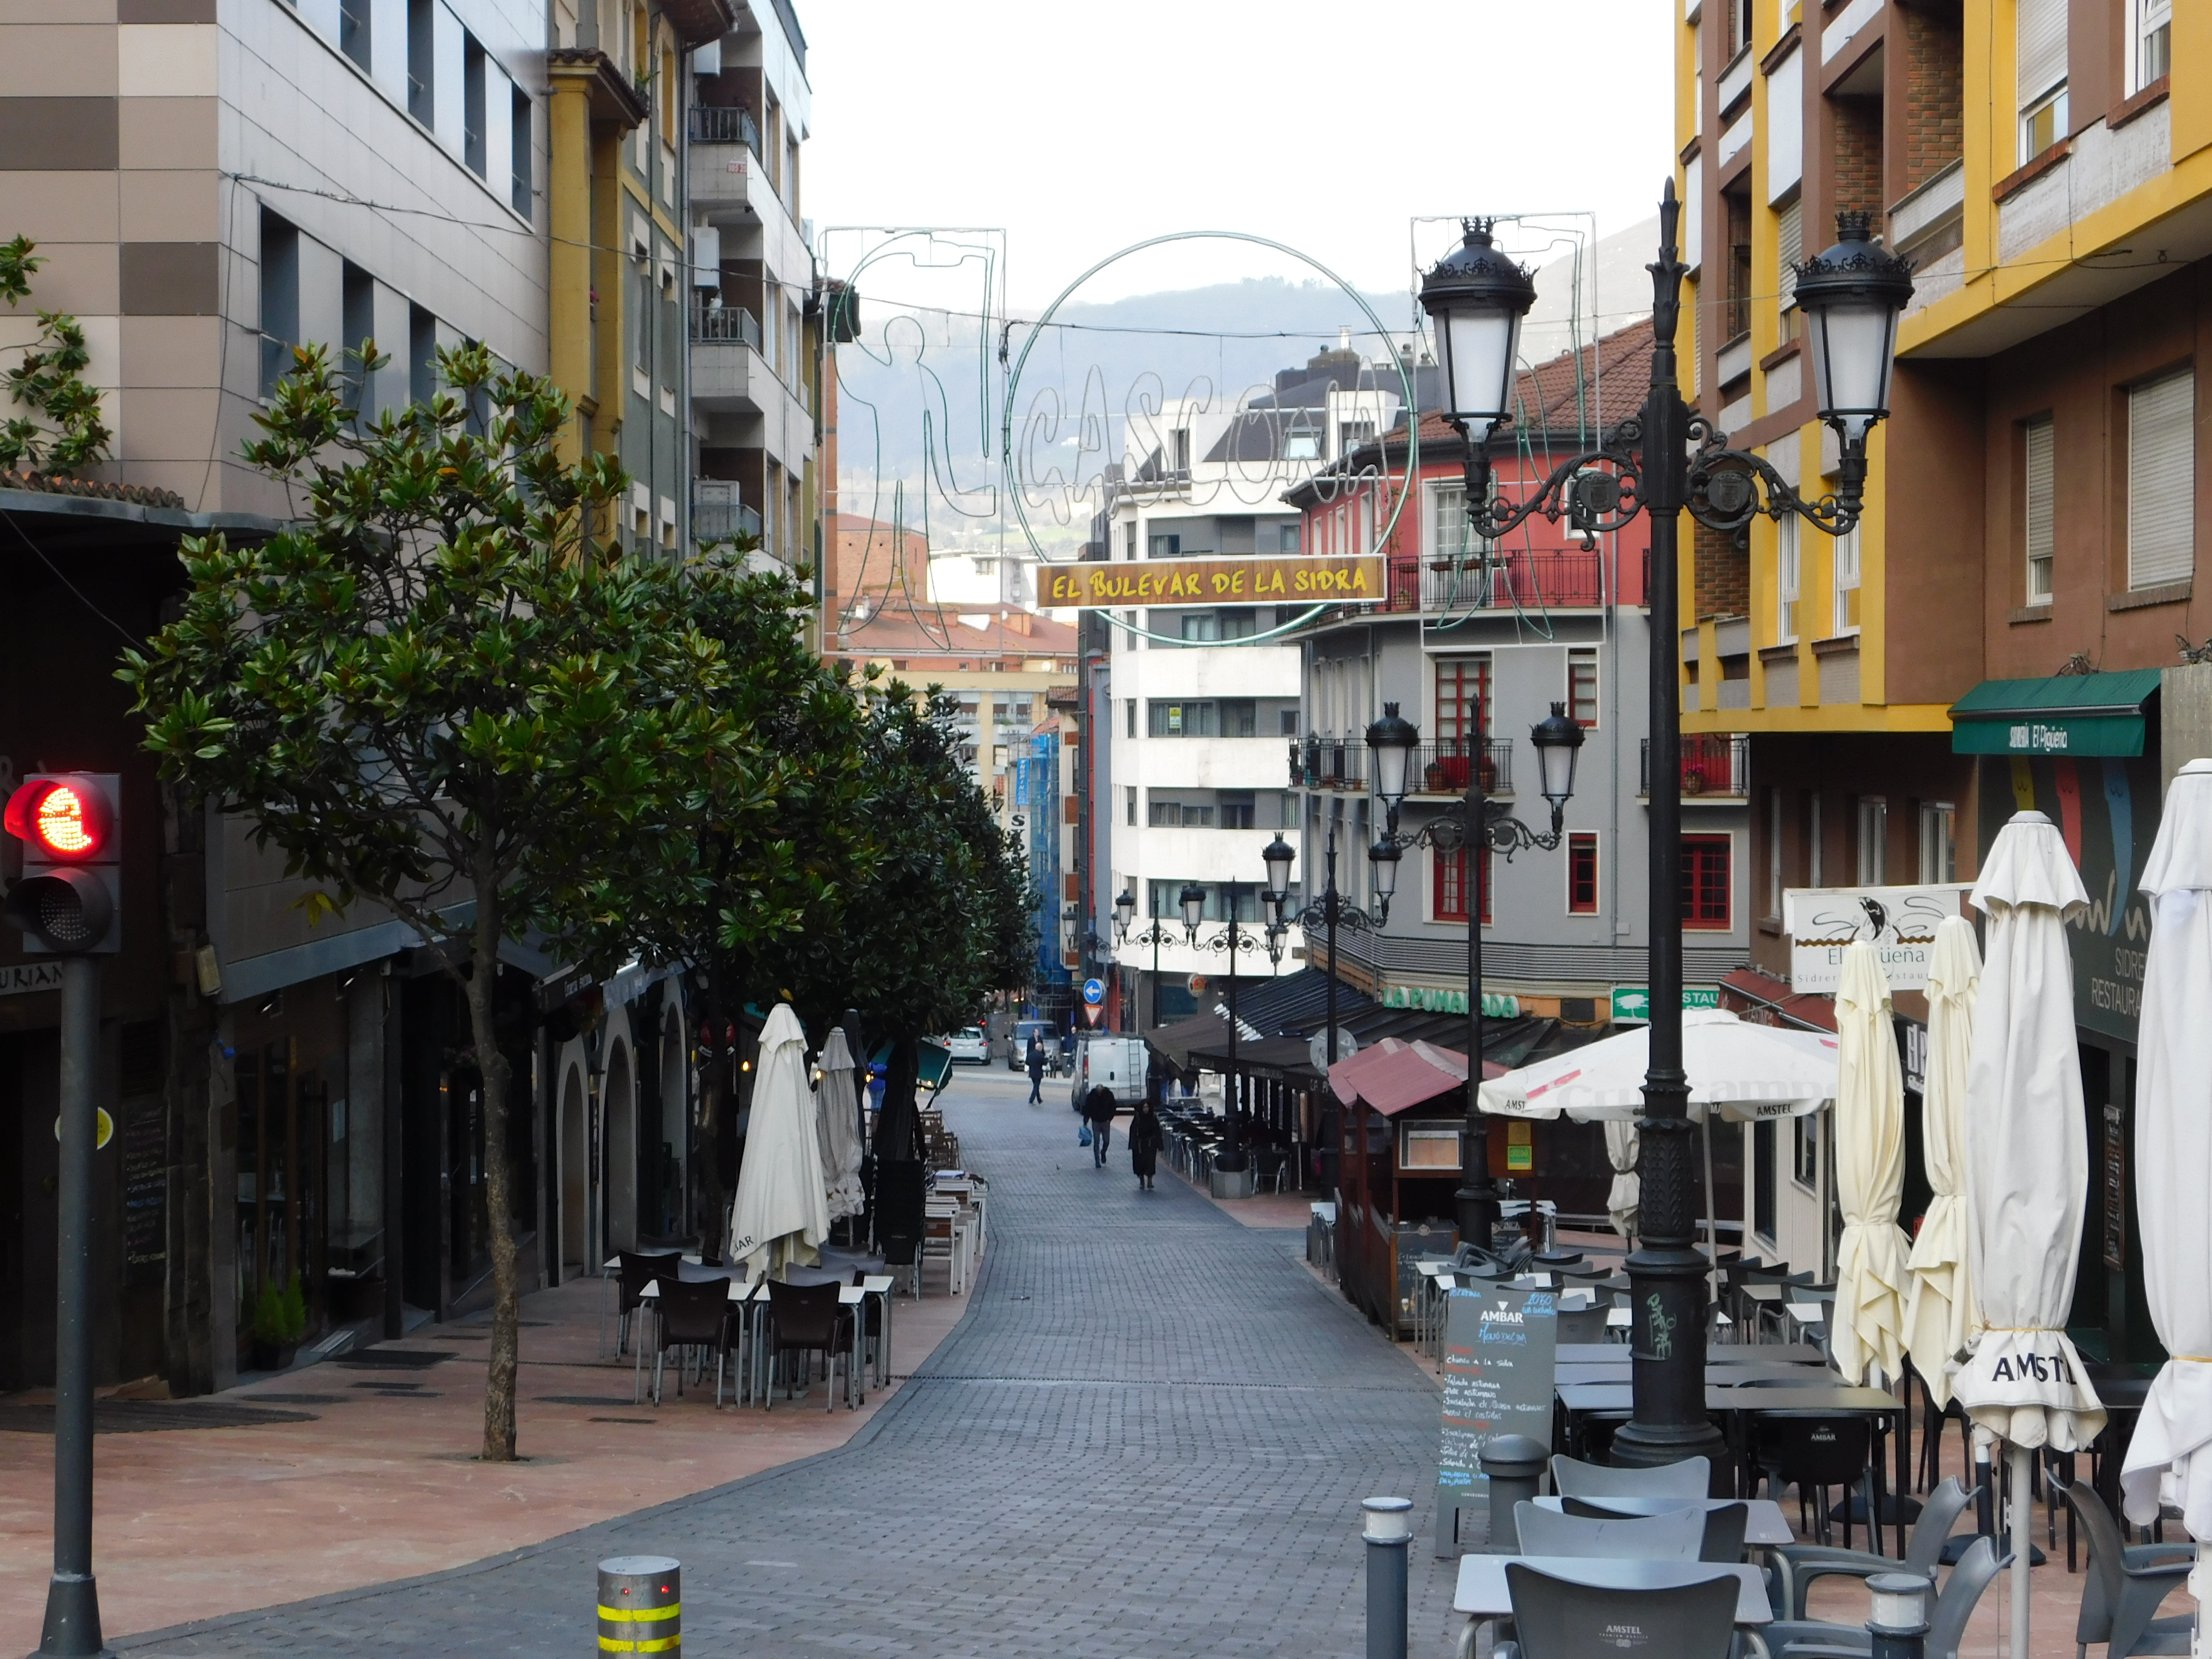 Image of the calle Gascona